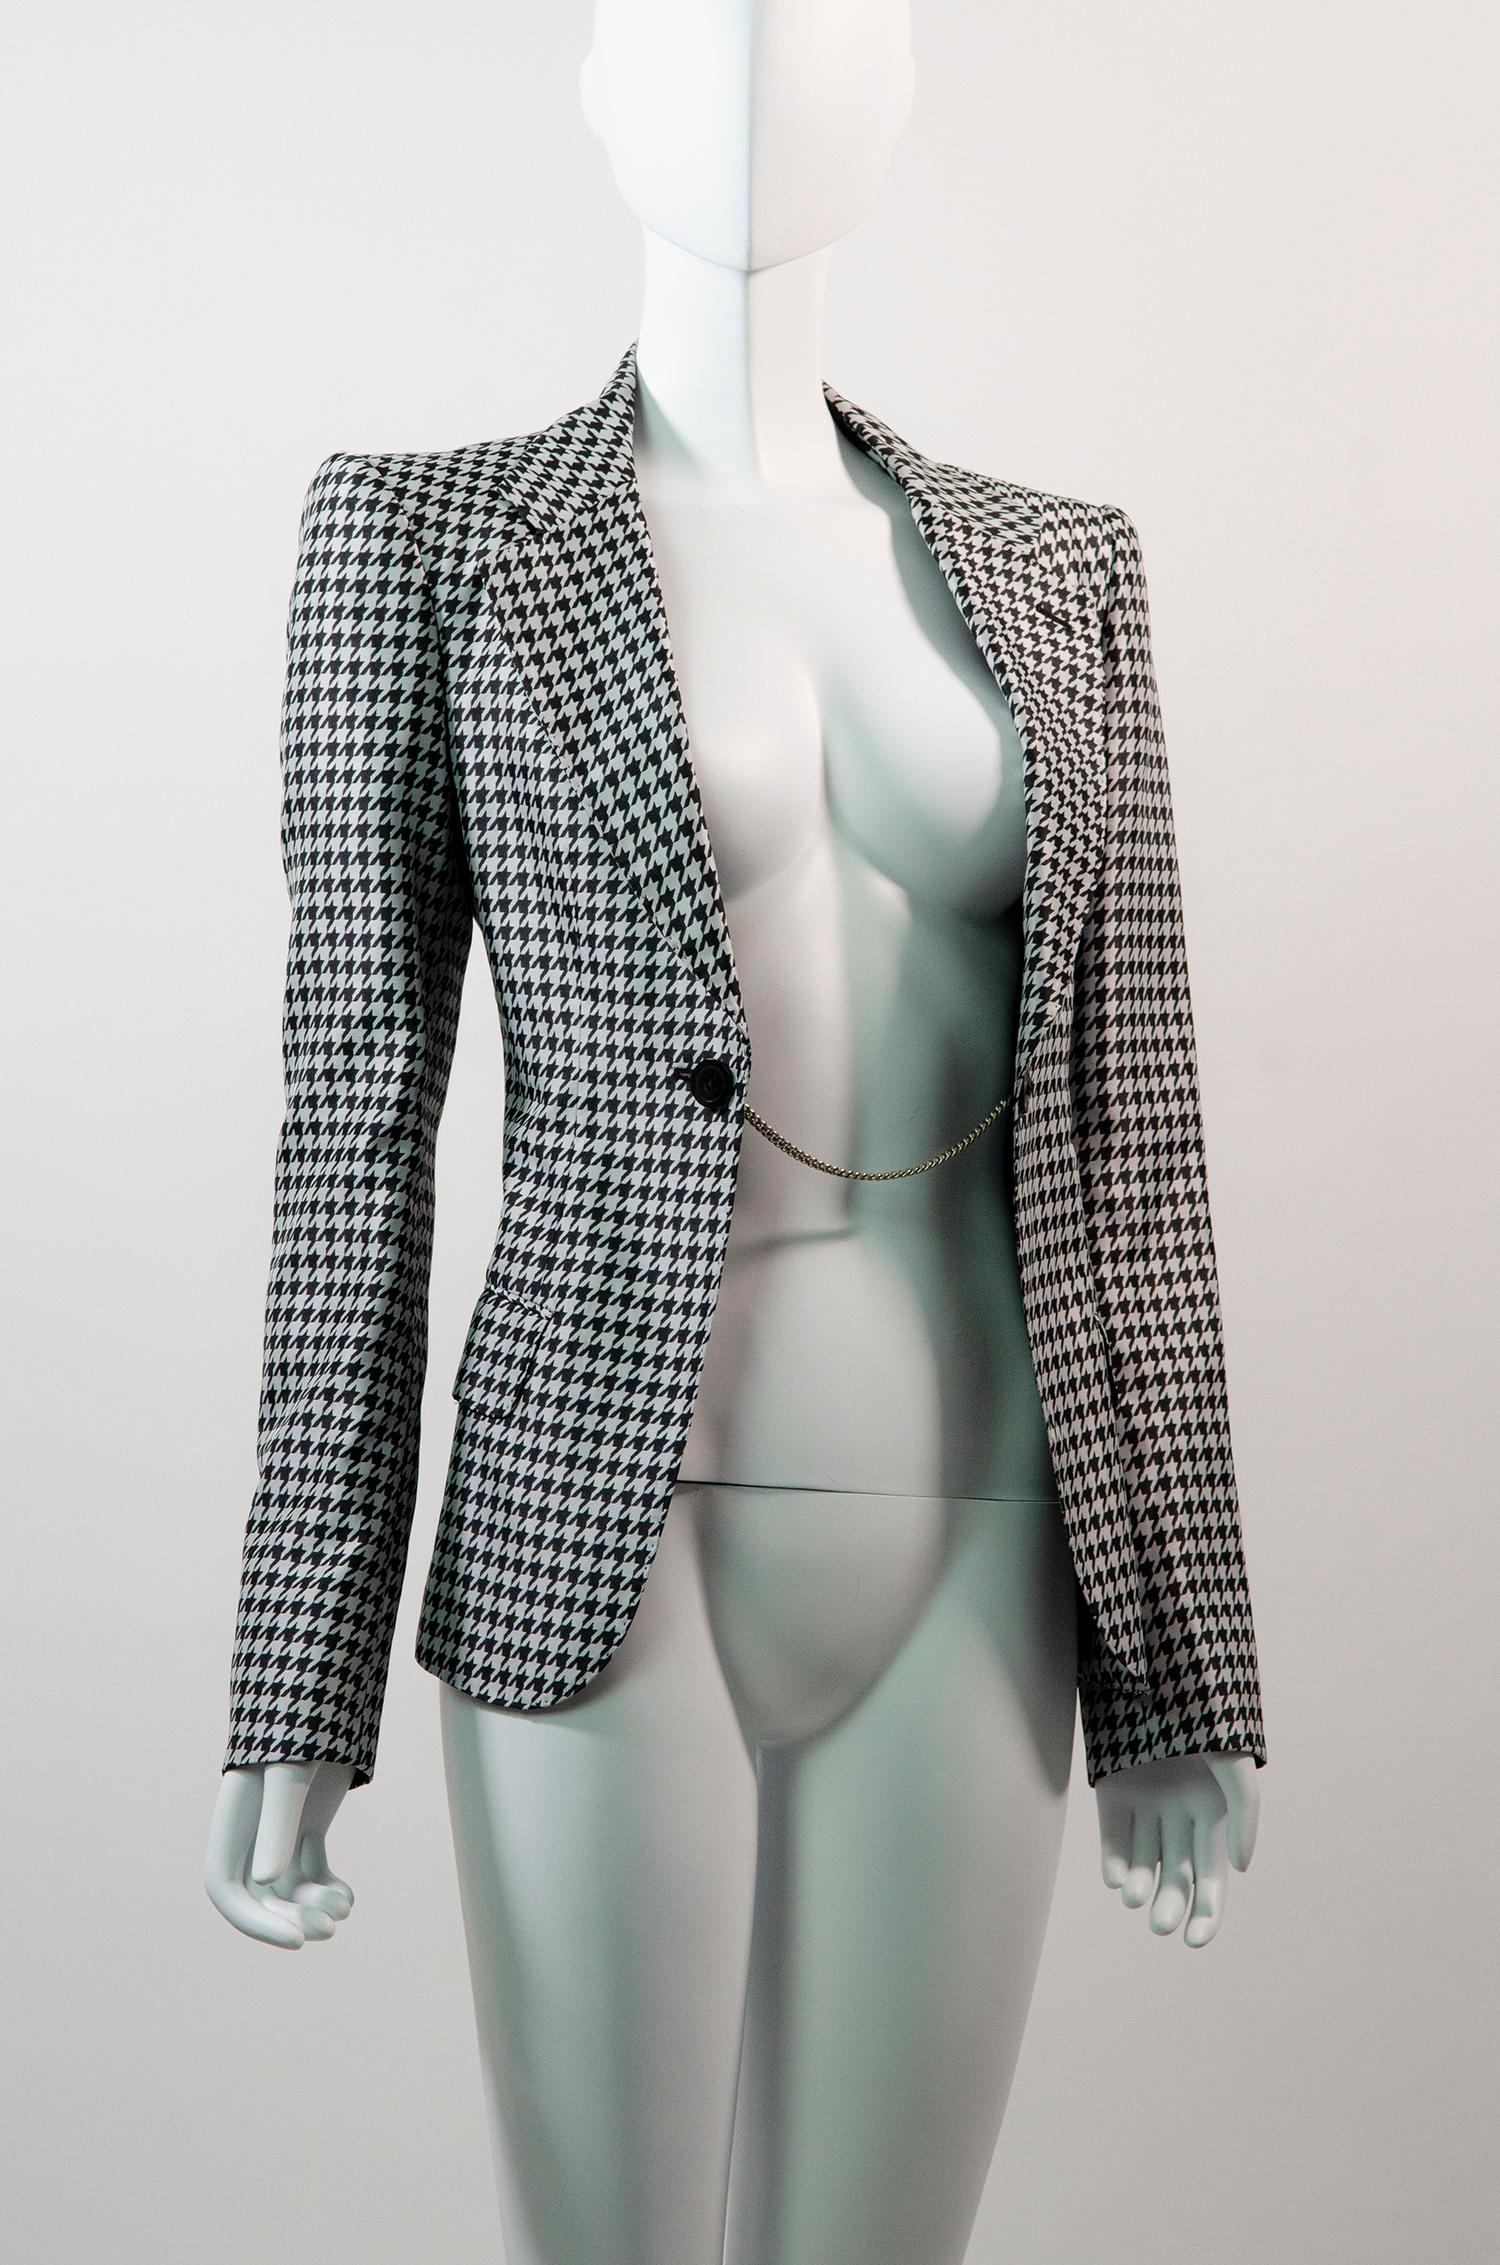 Insane houndstooth blazer by Junya Watanabe from his 2010 spring collection.

Tailored to perfection, this blazer is a work of art! This collection which focused on menswear for women was a perfect mix of avant-garde and utilitarian. Made from a